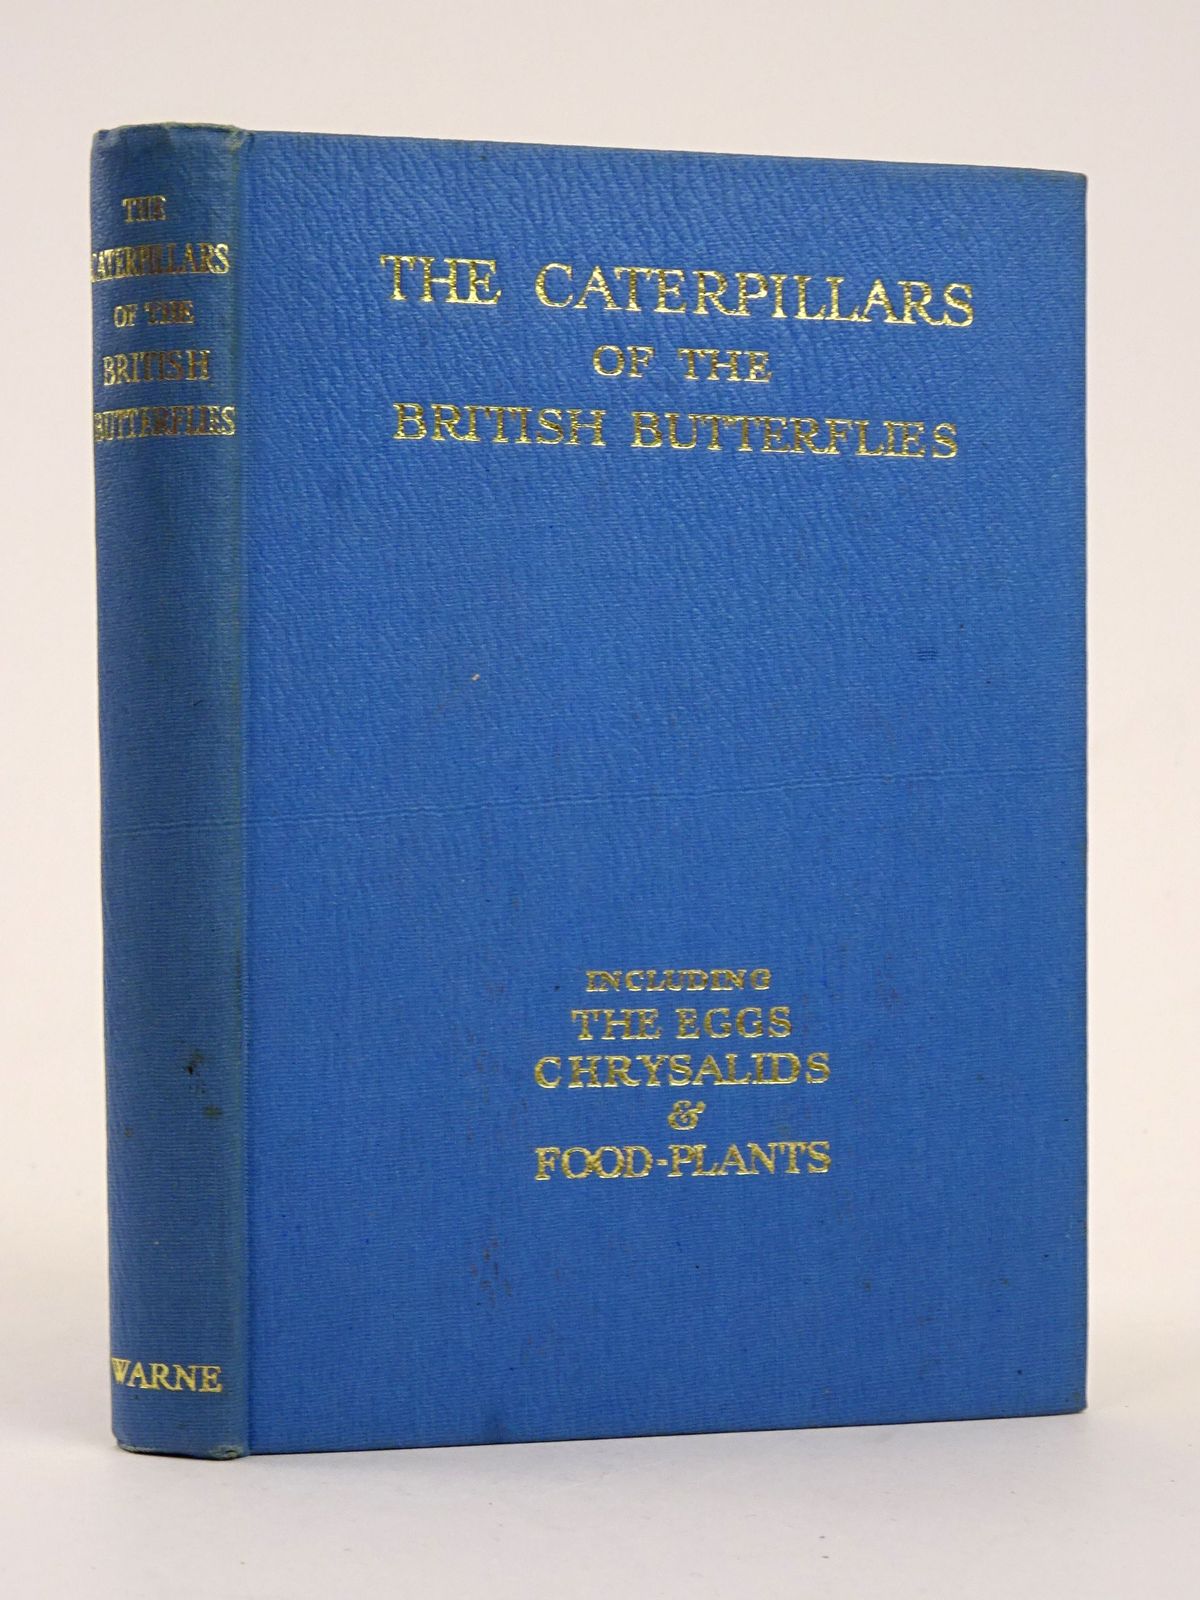 Photo of THE CATERPILLARS OF THE BRITISH BUTTERFLIES INCLUDING THE EGGS, CHRYSALIDS AND FOOD-PLANTS written by Stokoe, W.J. published by Frederick Warne & Co Ltd. (STOCK CODE: 1818329)  for sale by Stella & Rose's Books